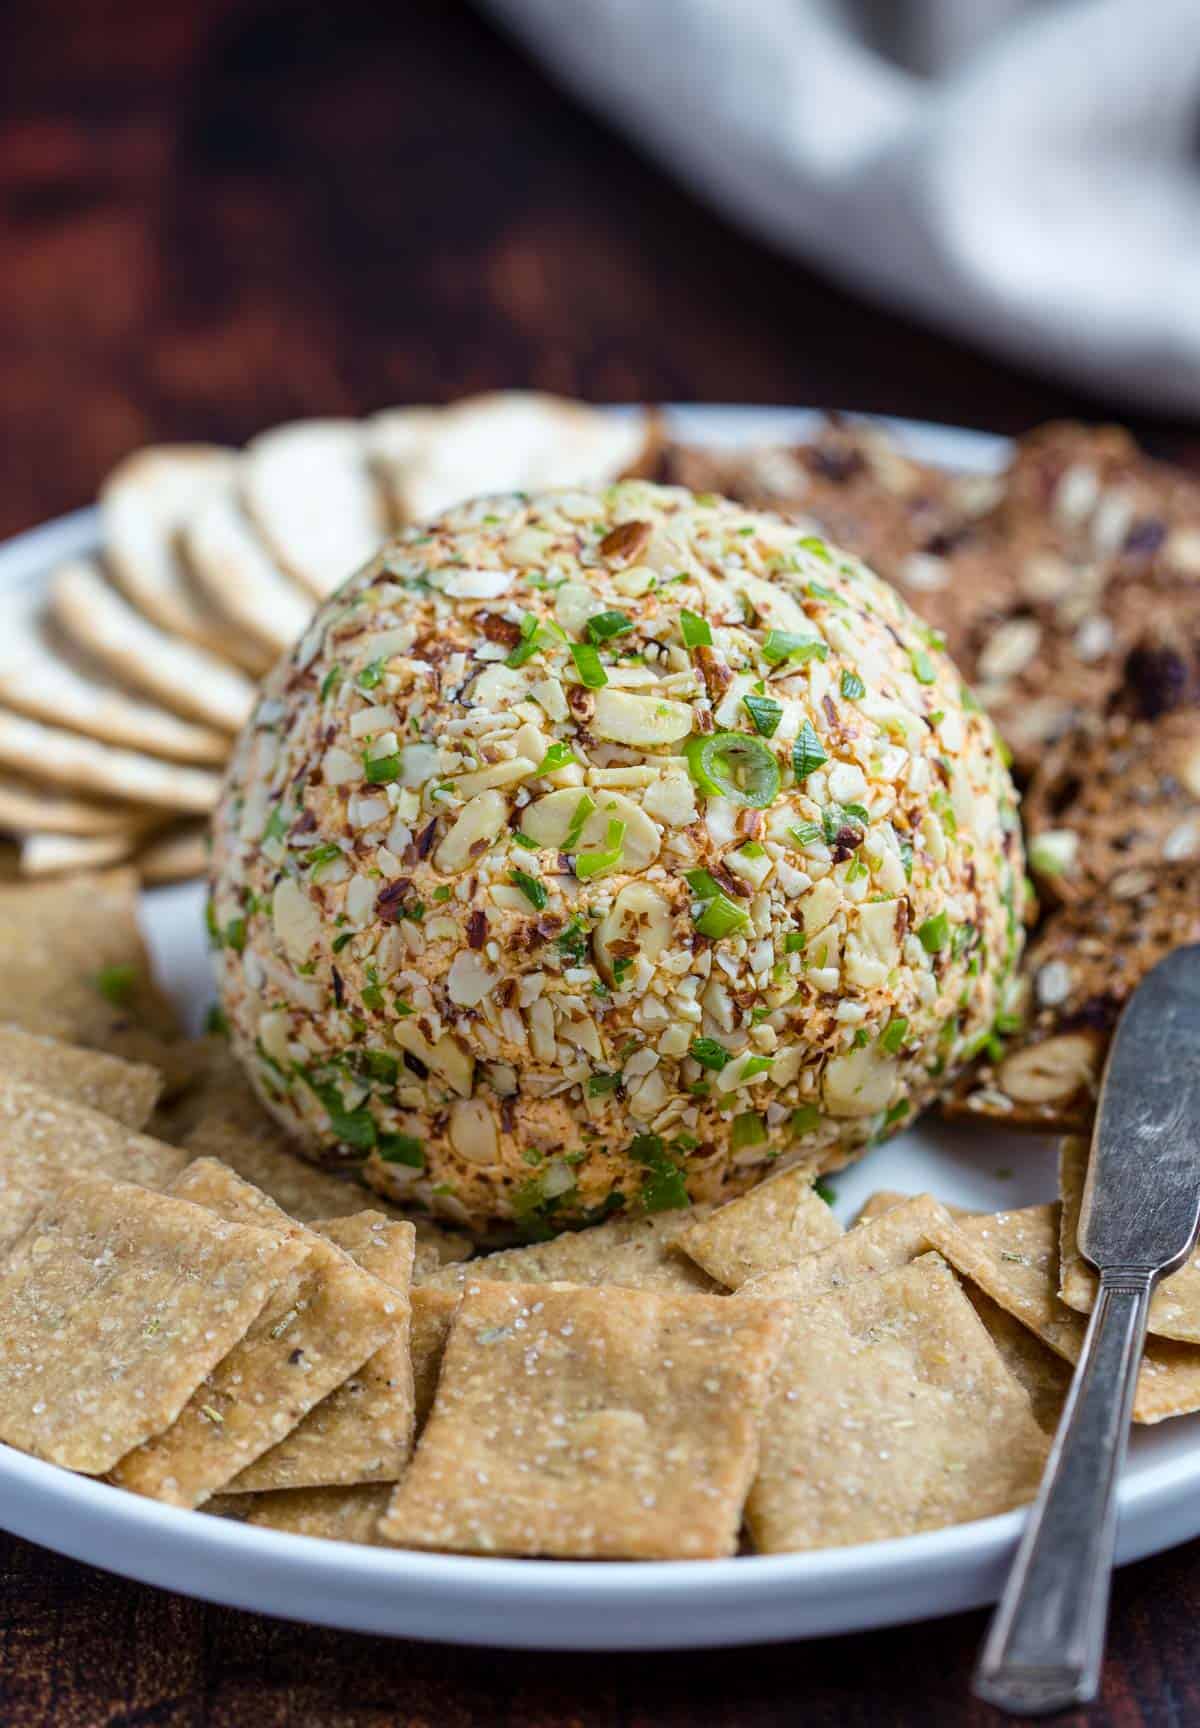 A smoked cheeseball coated with smoked almonds on a platter with crackers